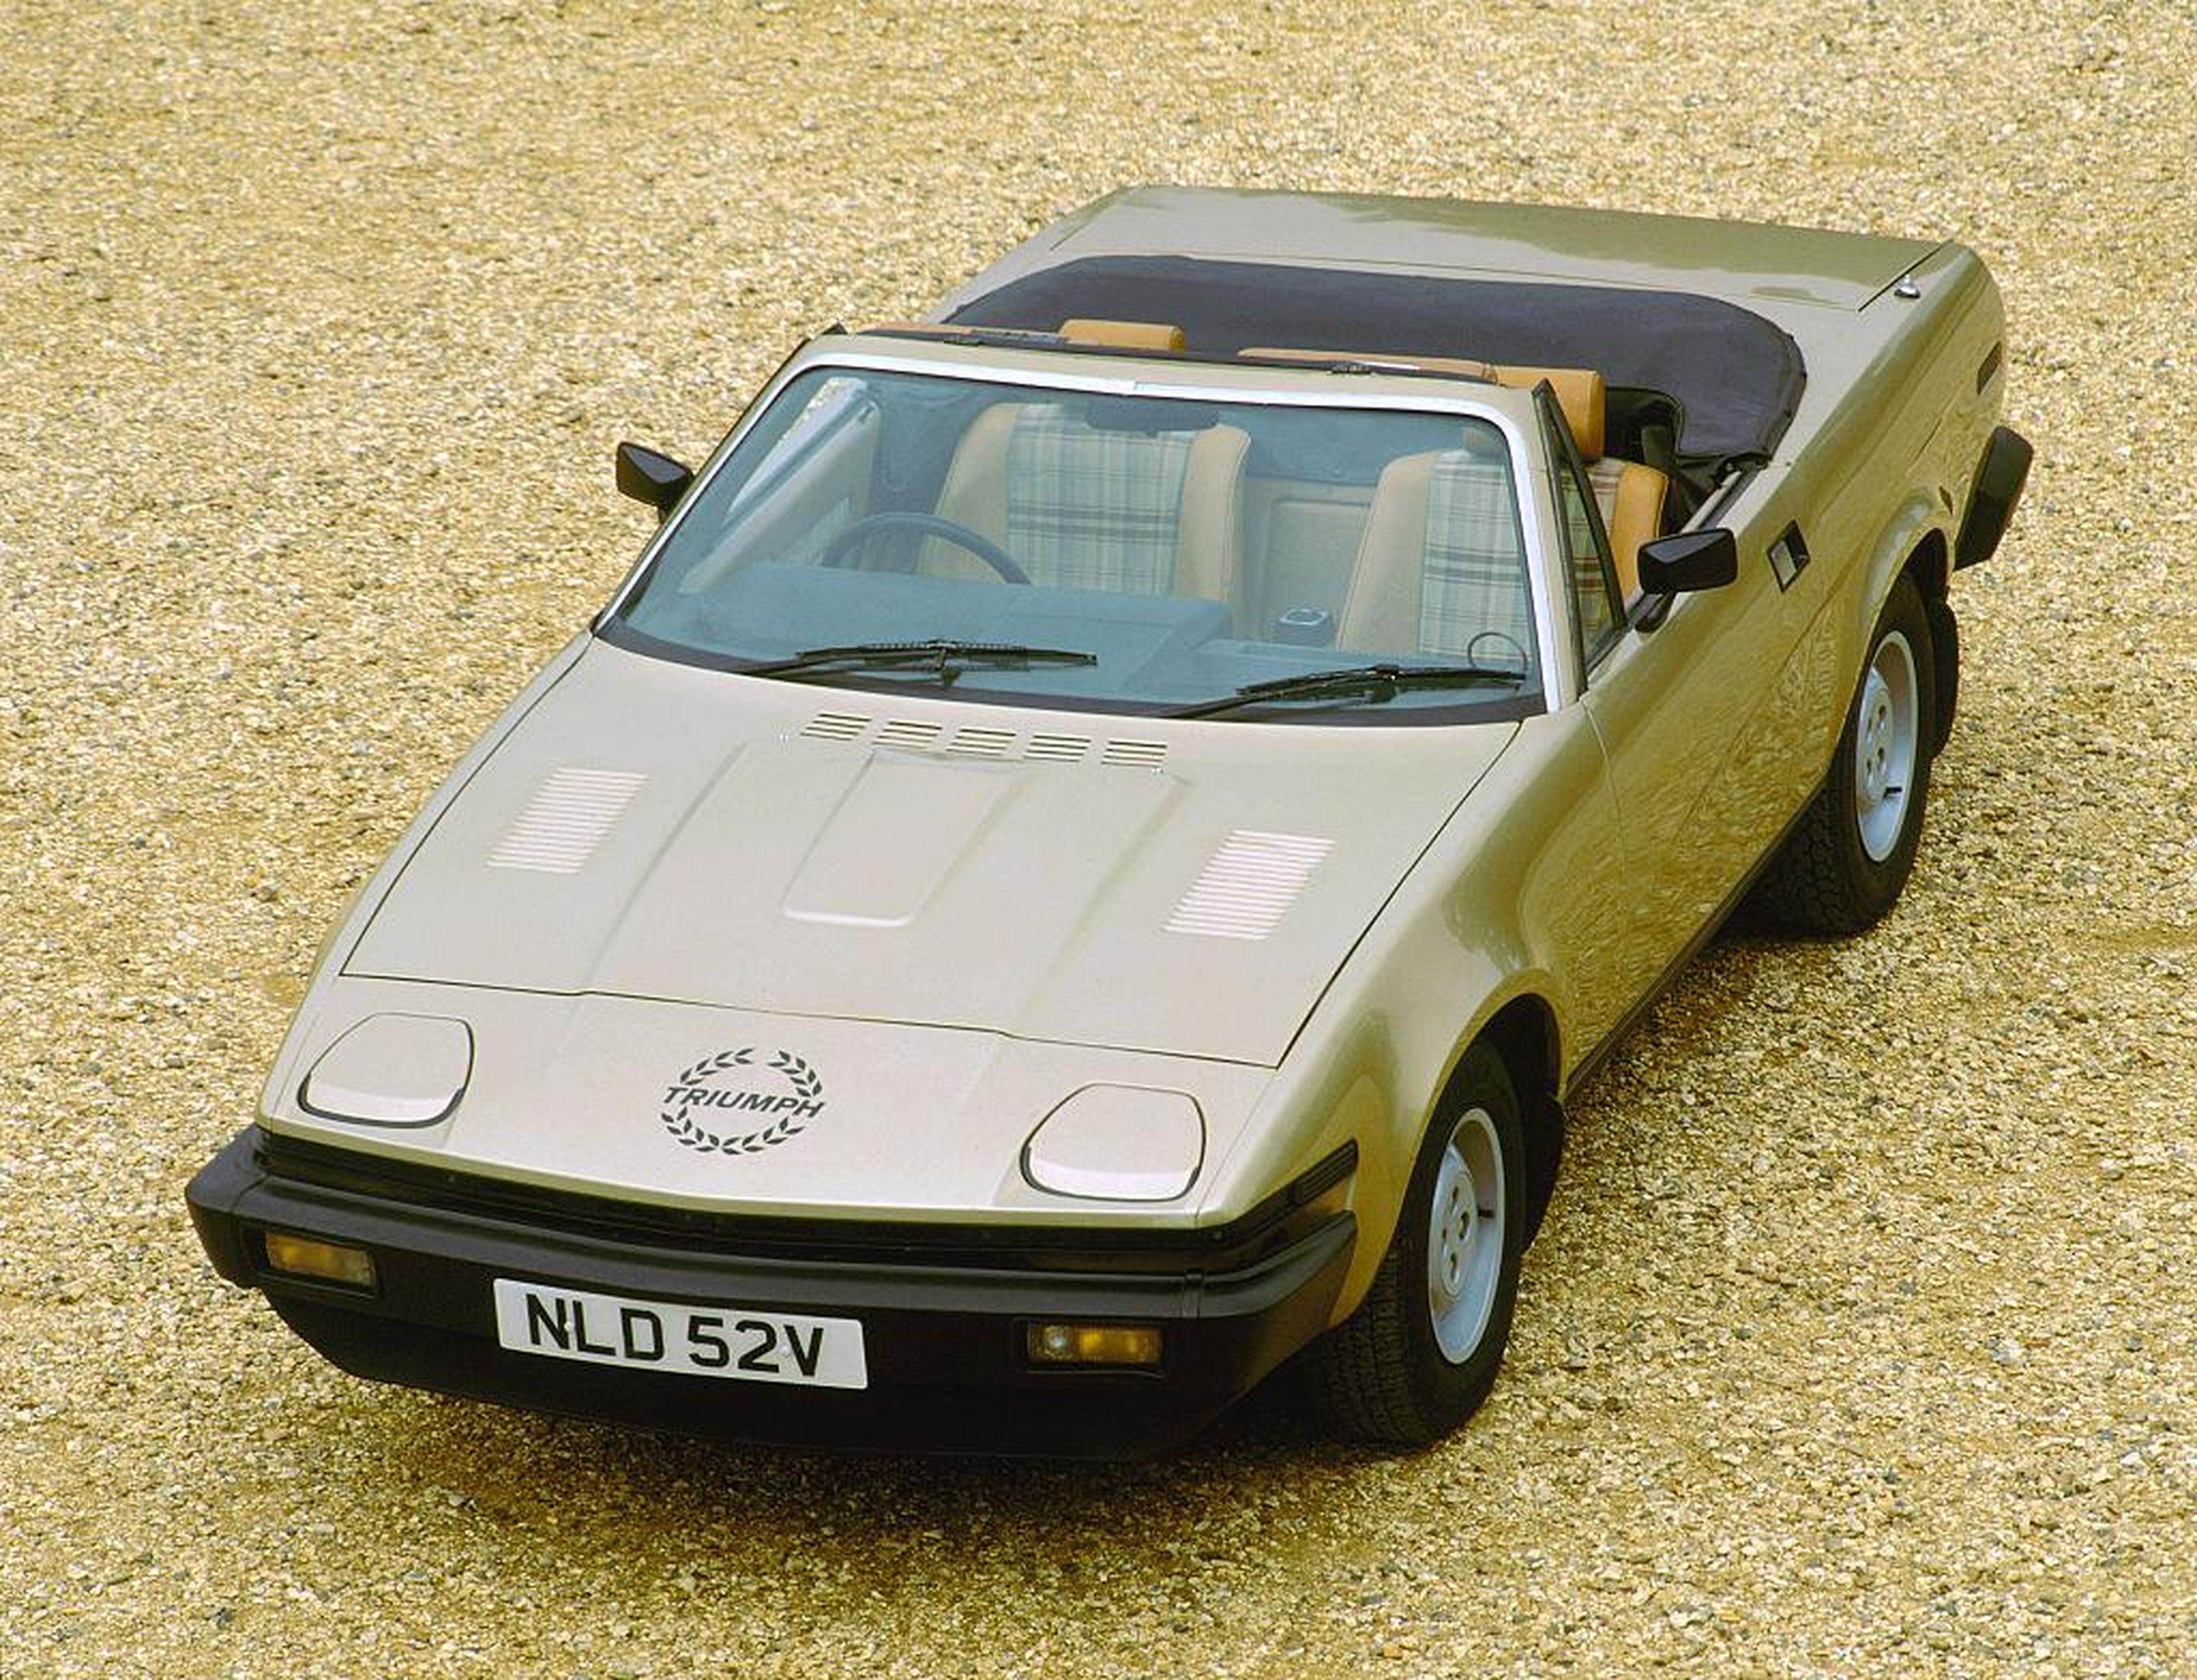 The Triumph TR7 was built from 1974-1981 and was immortalized for its wedge profile by the the "shape of things to come" advertising tagline